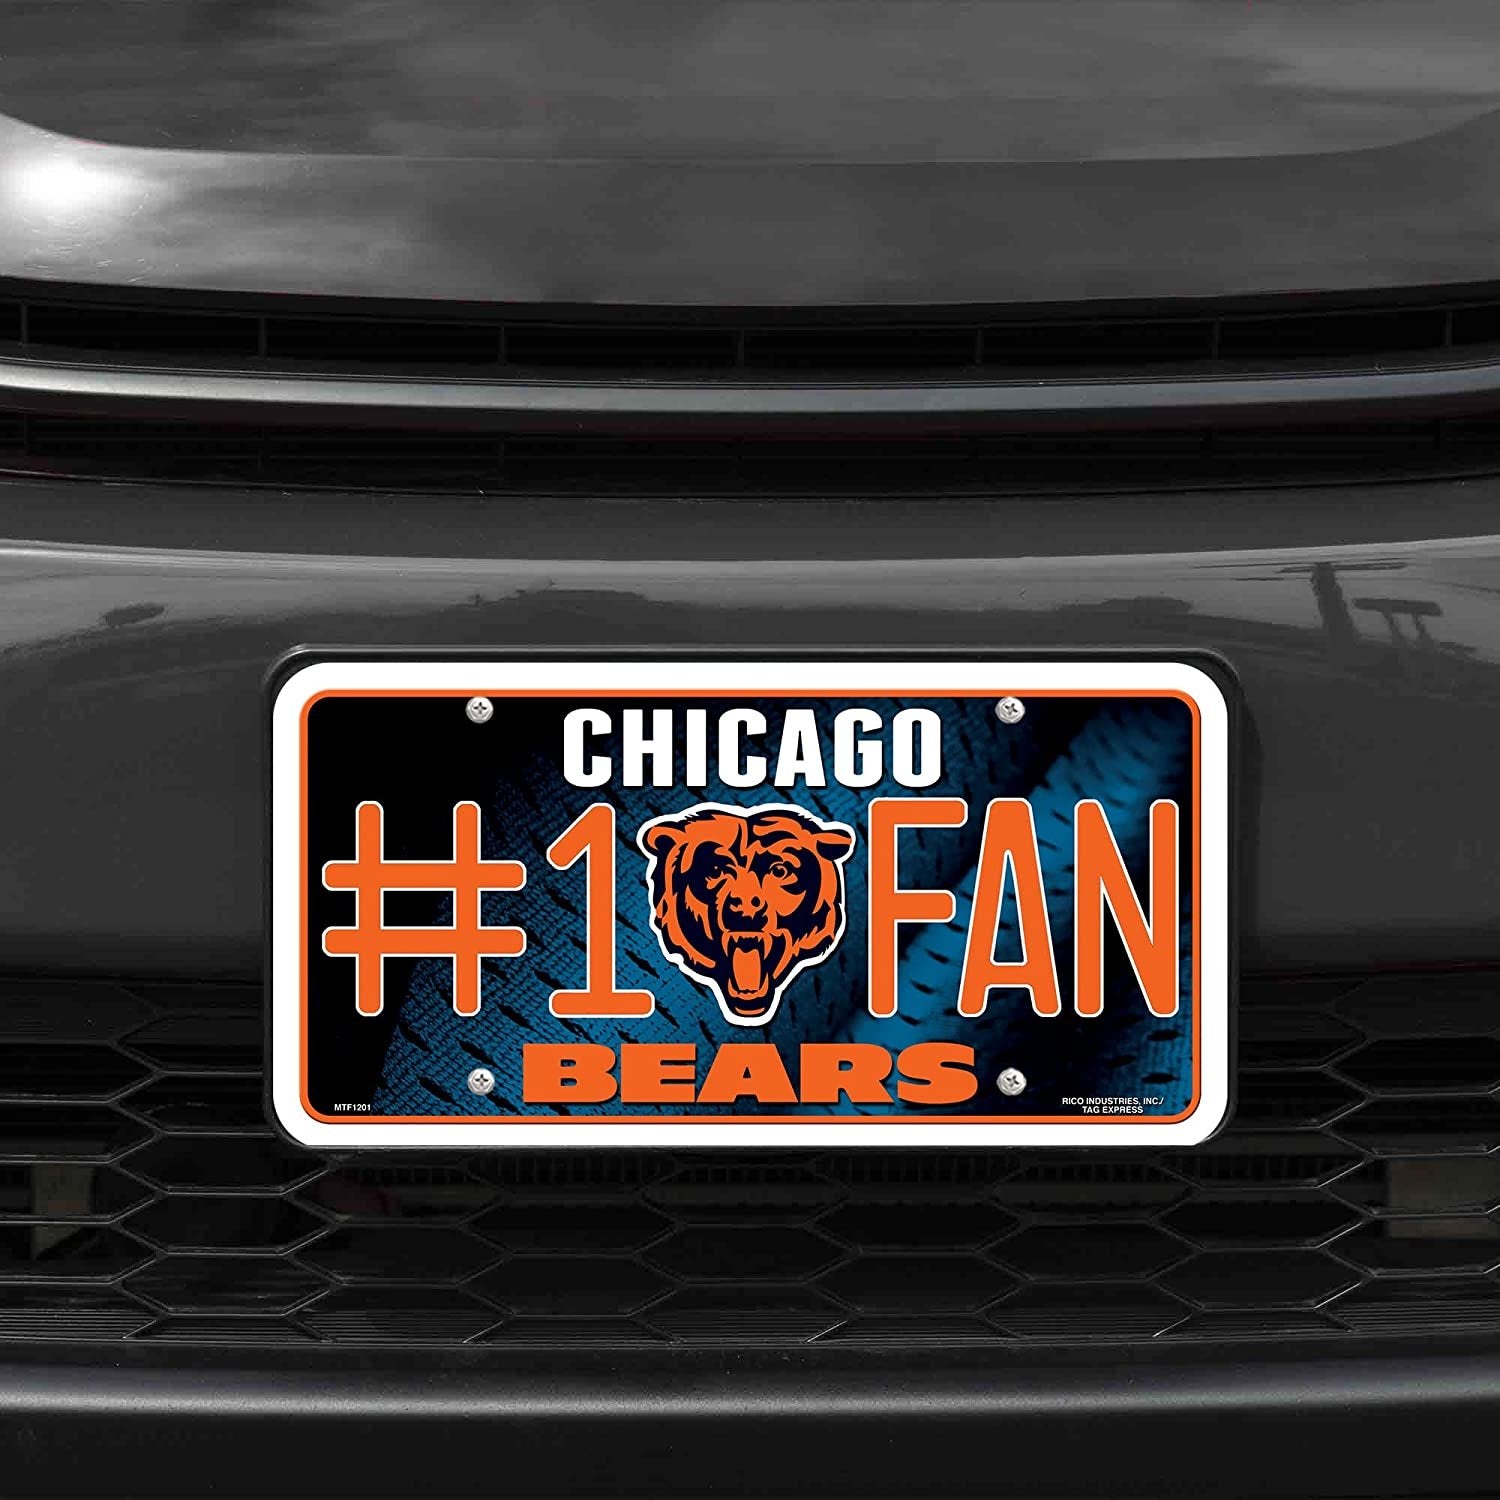 Chicago Bears #1 Fan Metal License Plate Tag Aluminum Novelty 12x6 Inch